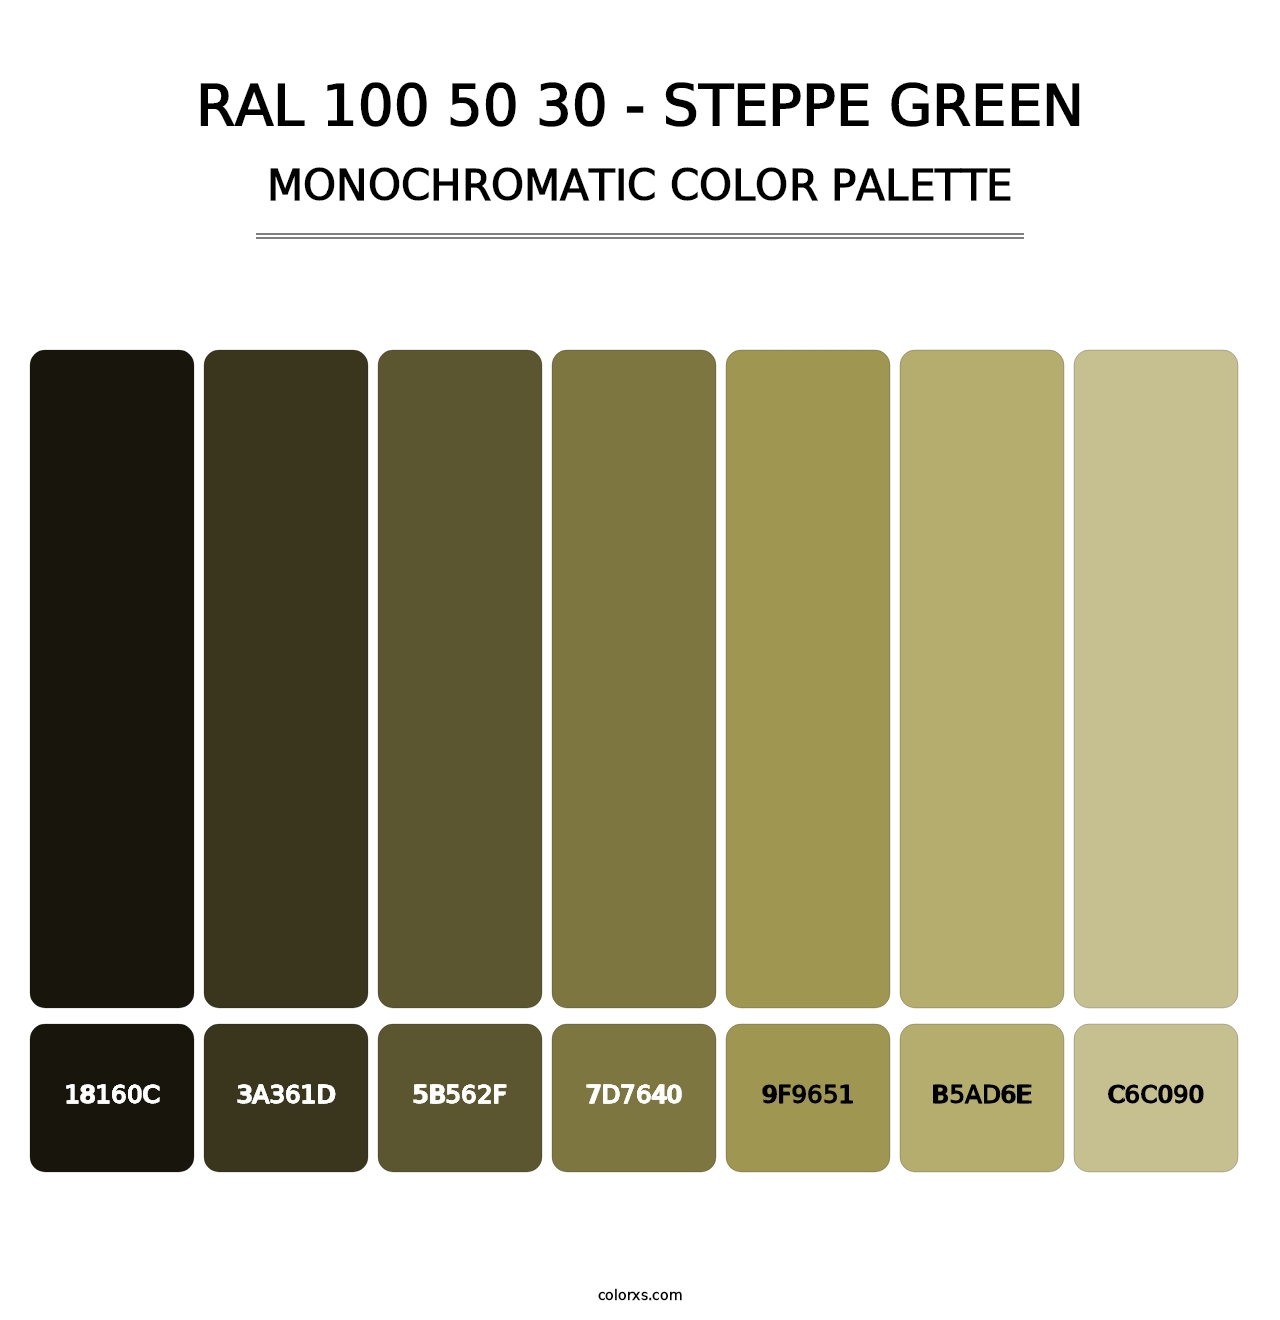 RAL 100 50 30 - Steppe Green - Monochromatic Color Palette